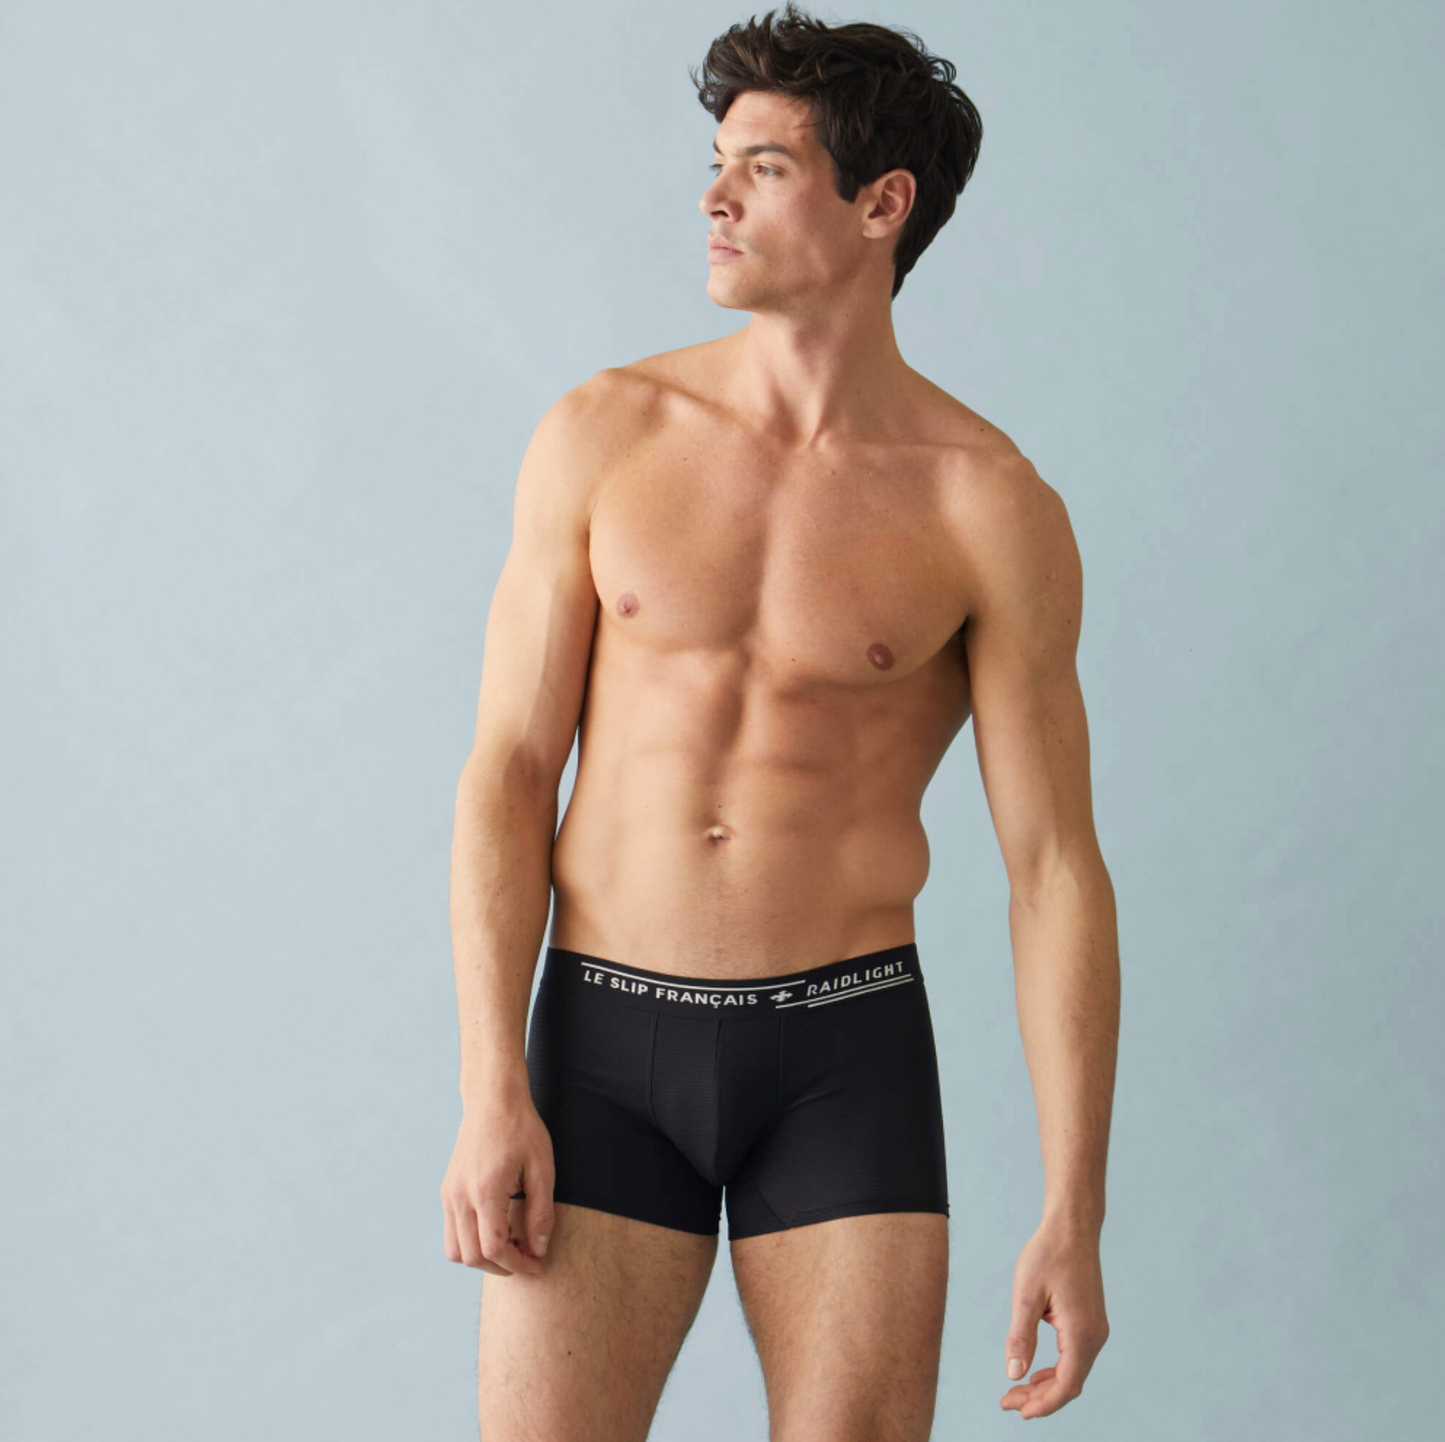 RAIDLIGHT SPORT BOXERS THE FRENCH BRIEFS 